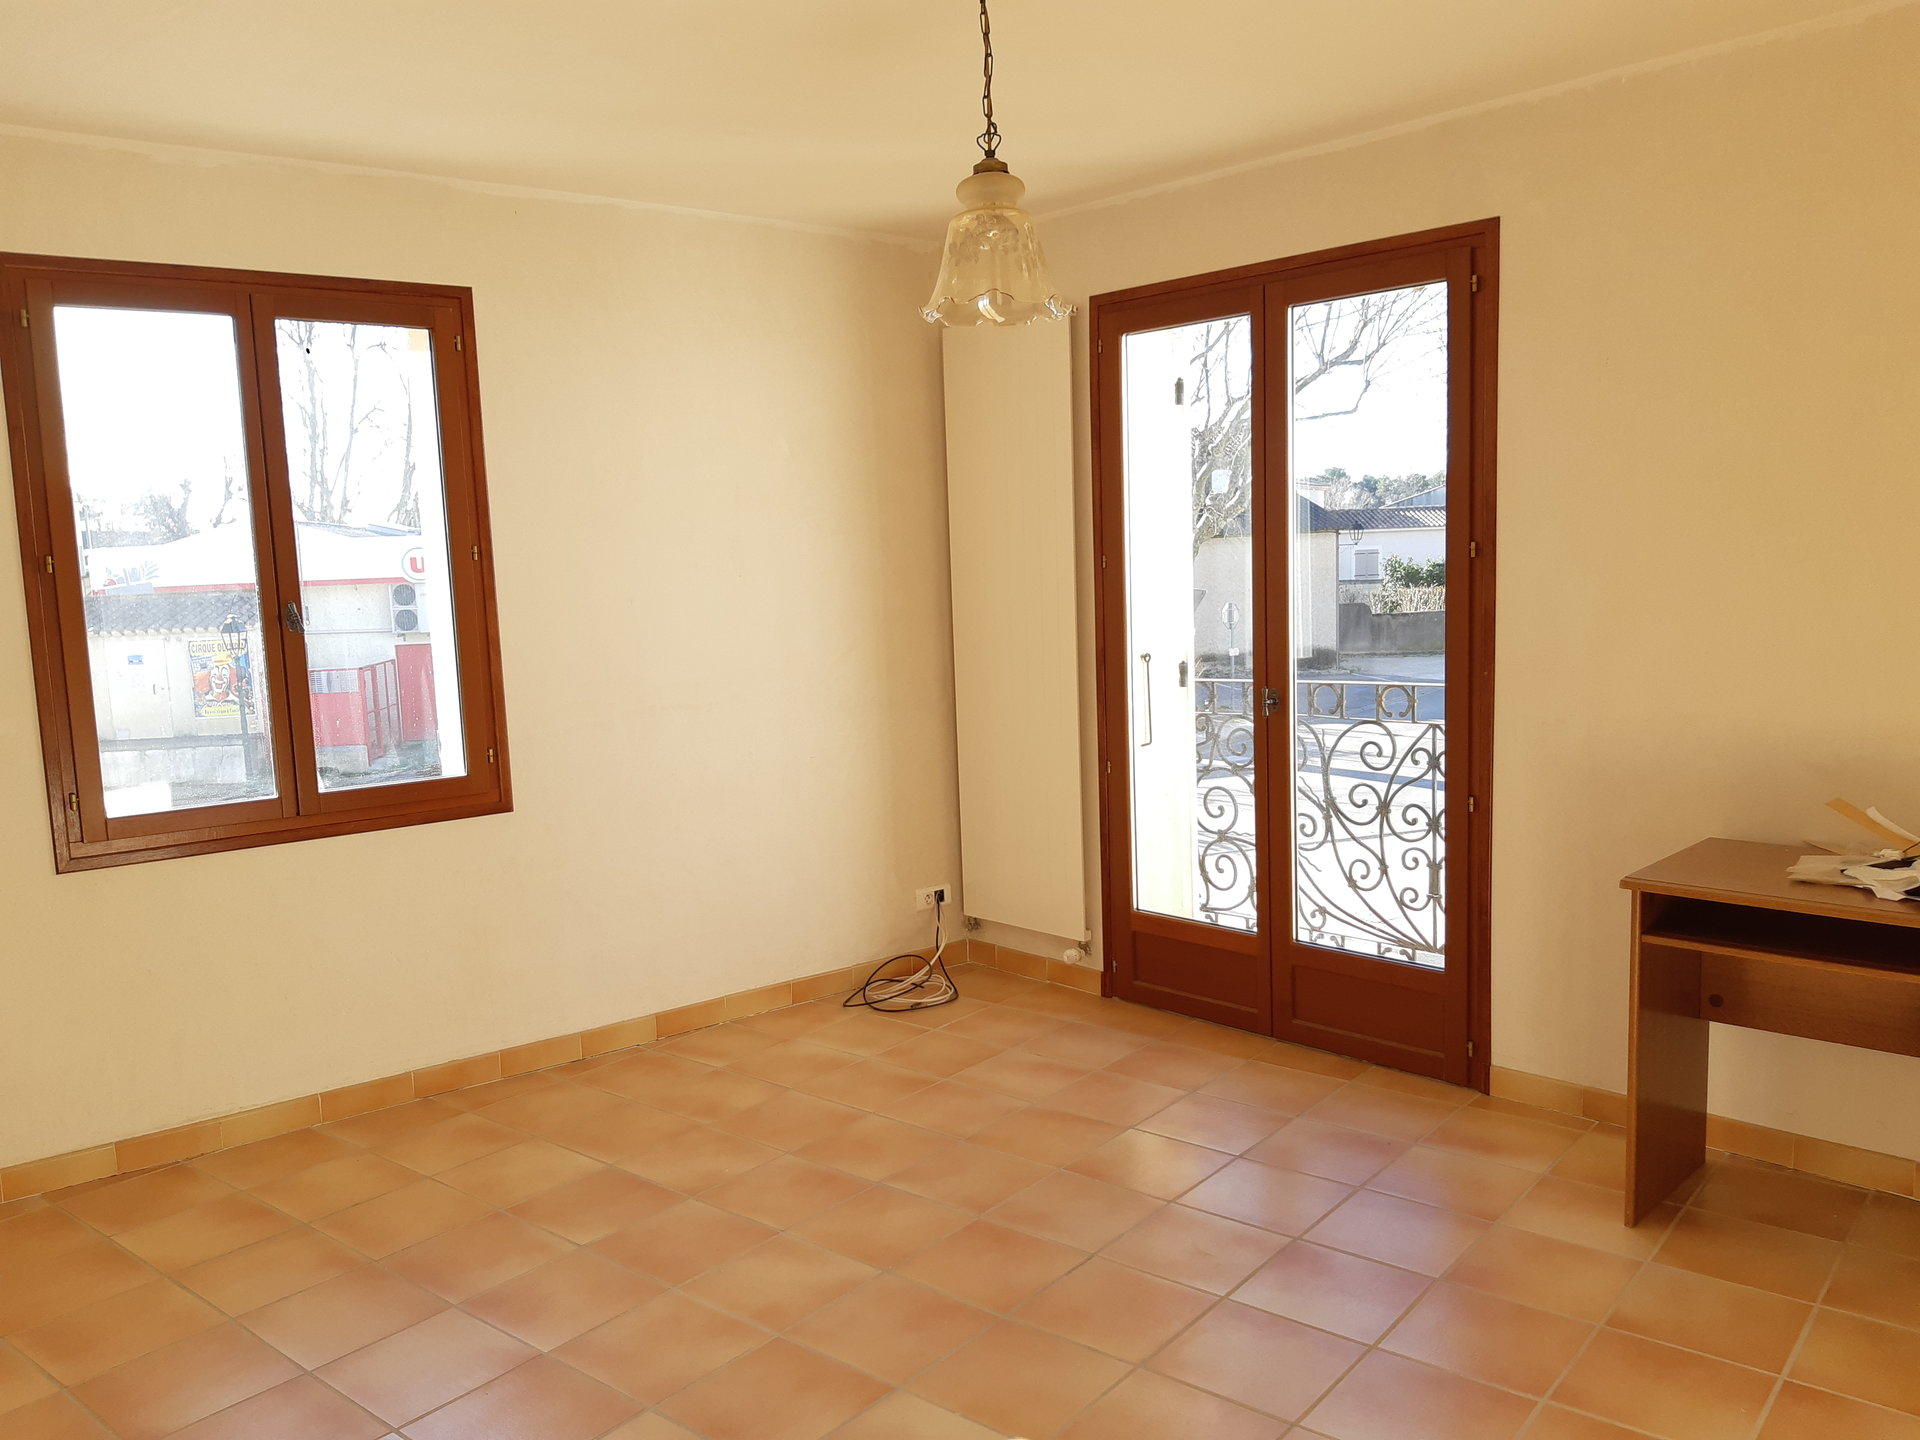 Location Appartement VALLABRÈGUES central, individuel, fioul / mazout chauffage